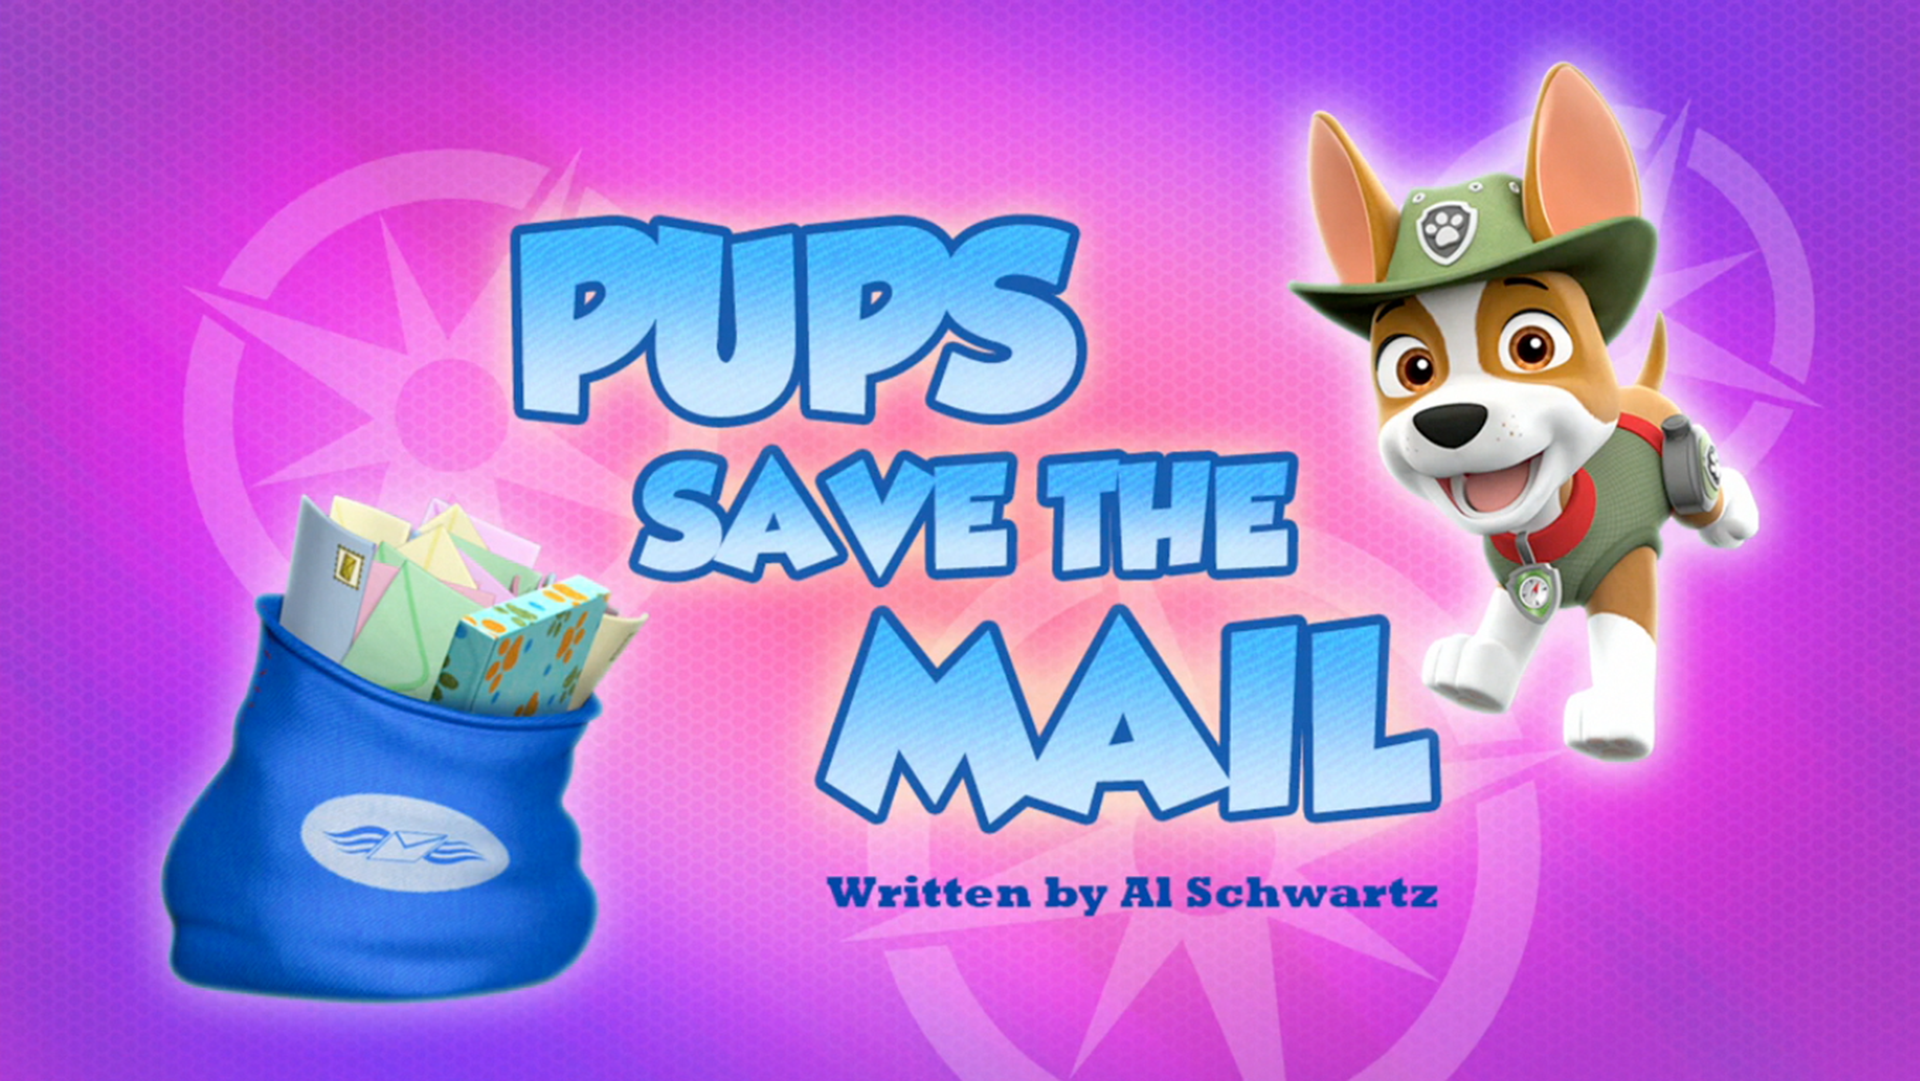 https://static.wikia.nocookie.net/paw-patrol/images/5/54/Pups_Save_the_Mail_%28HQ%29.png/revision/latest?cb=20171028075411